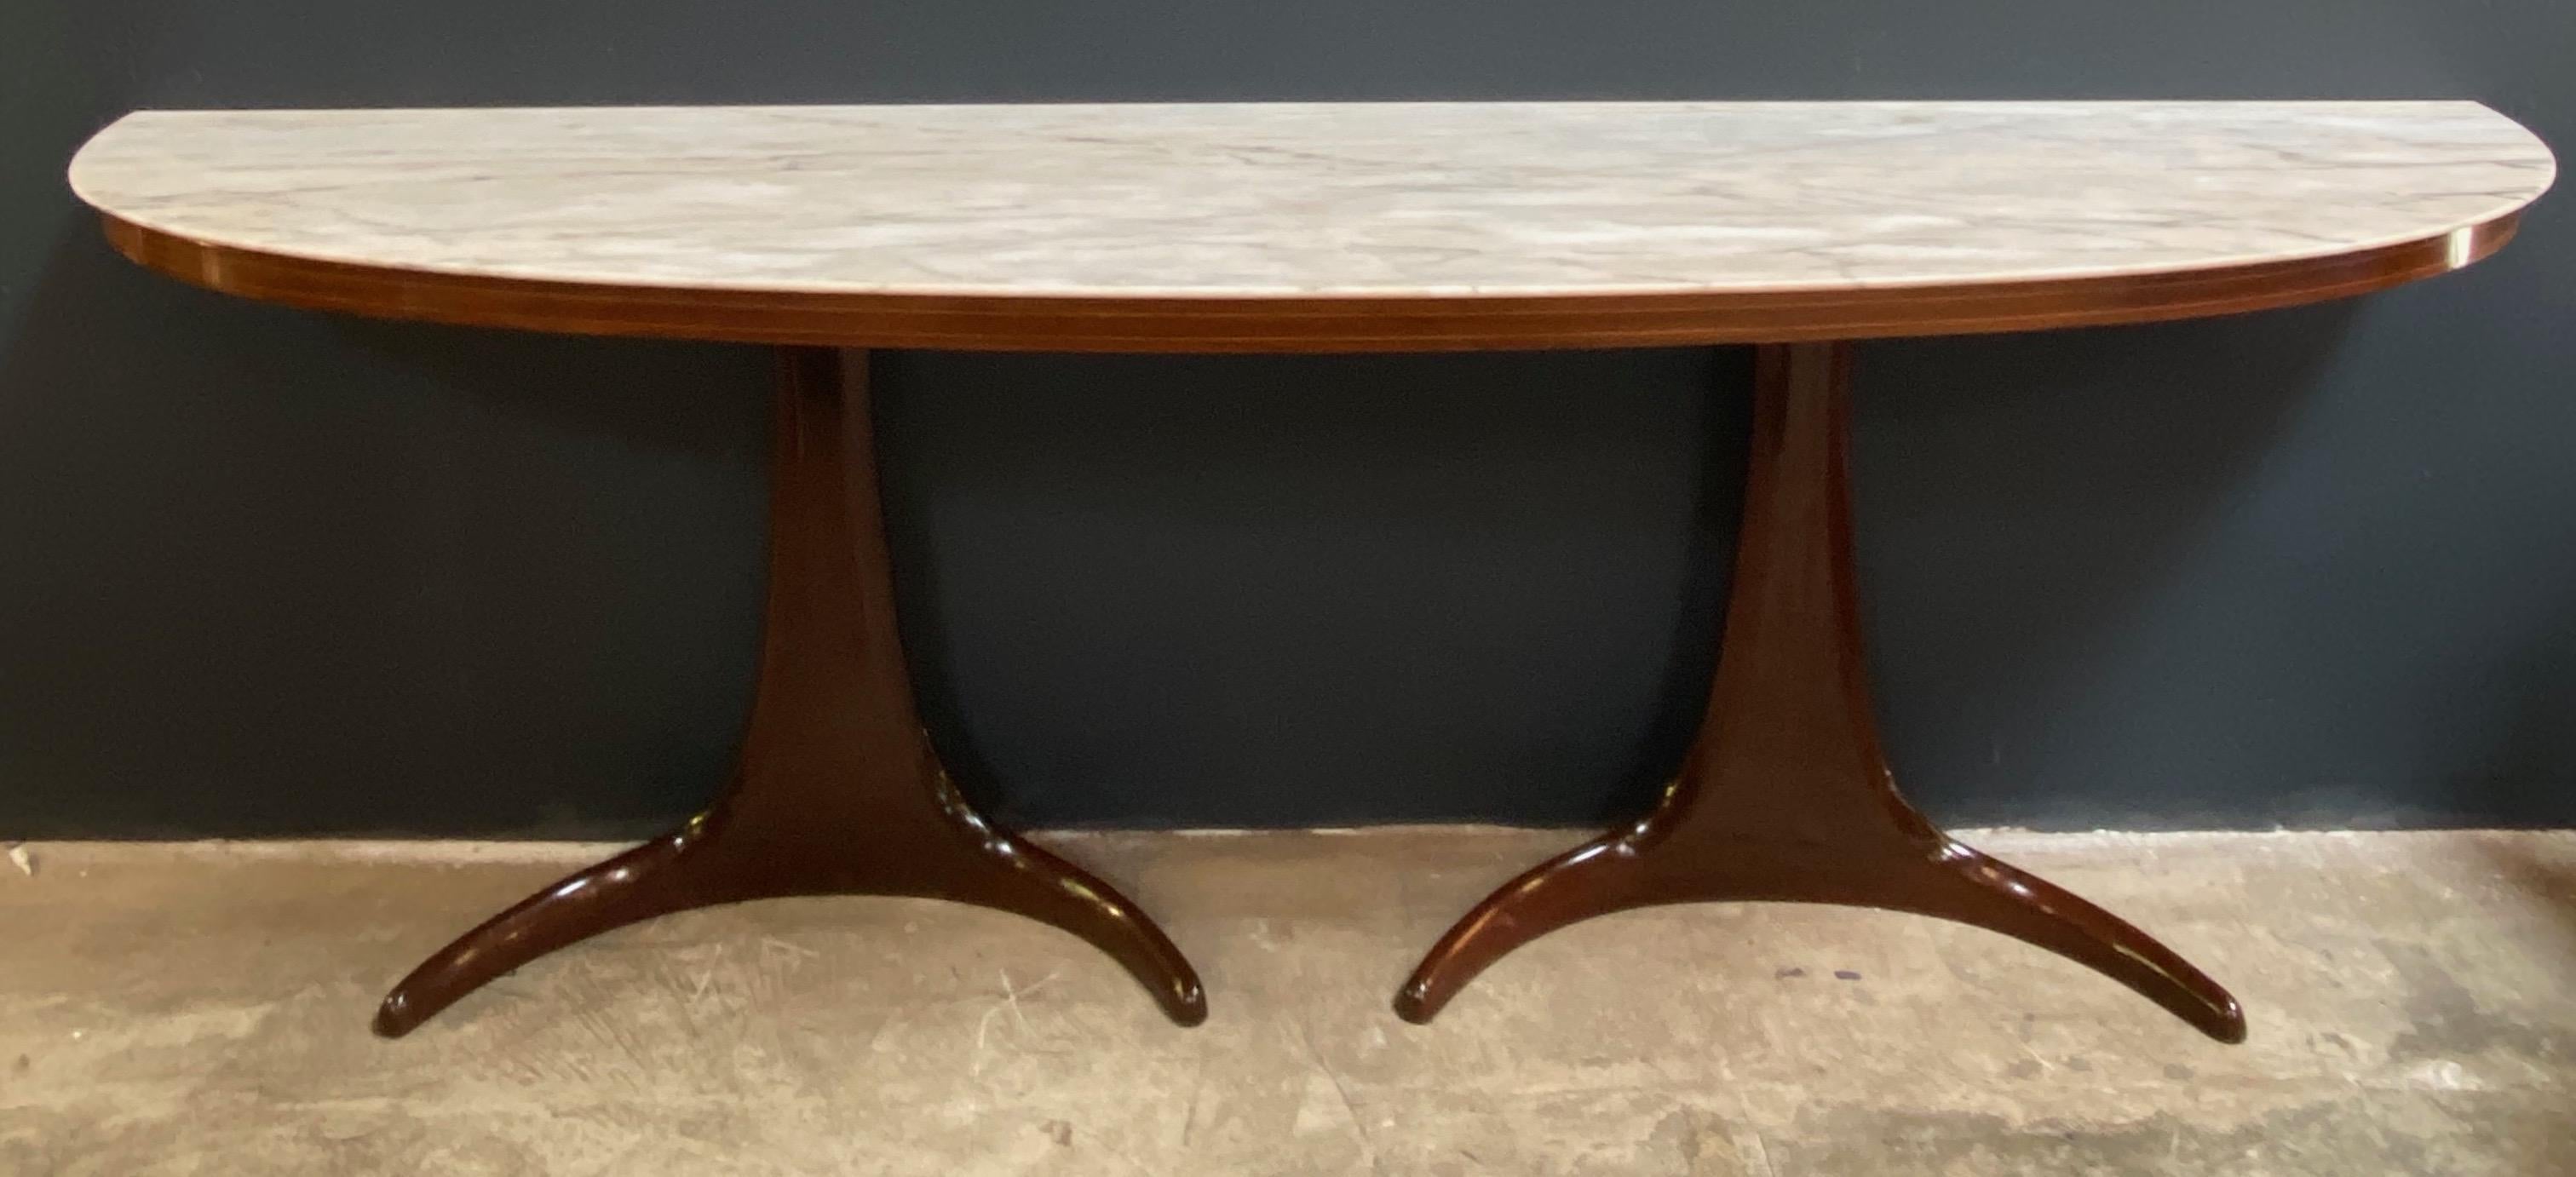 Buffet/console, in the style of Guglielmo Ulrich rosewood and marble, Italy, 1950s: two stunning wood round and cone shaped legs, connected to each other in curved wood and with its typical marble top give this console an extremely light and open